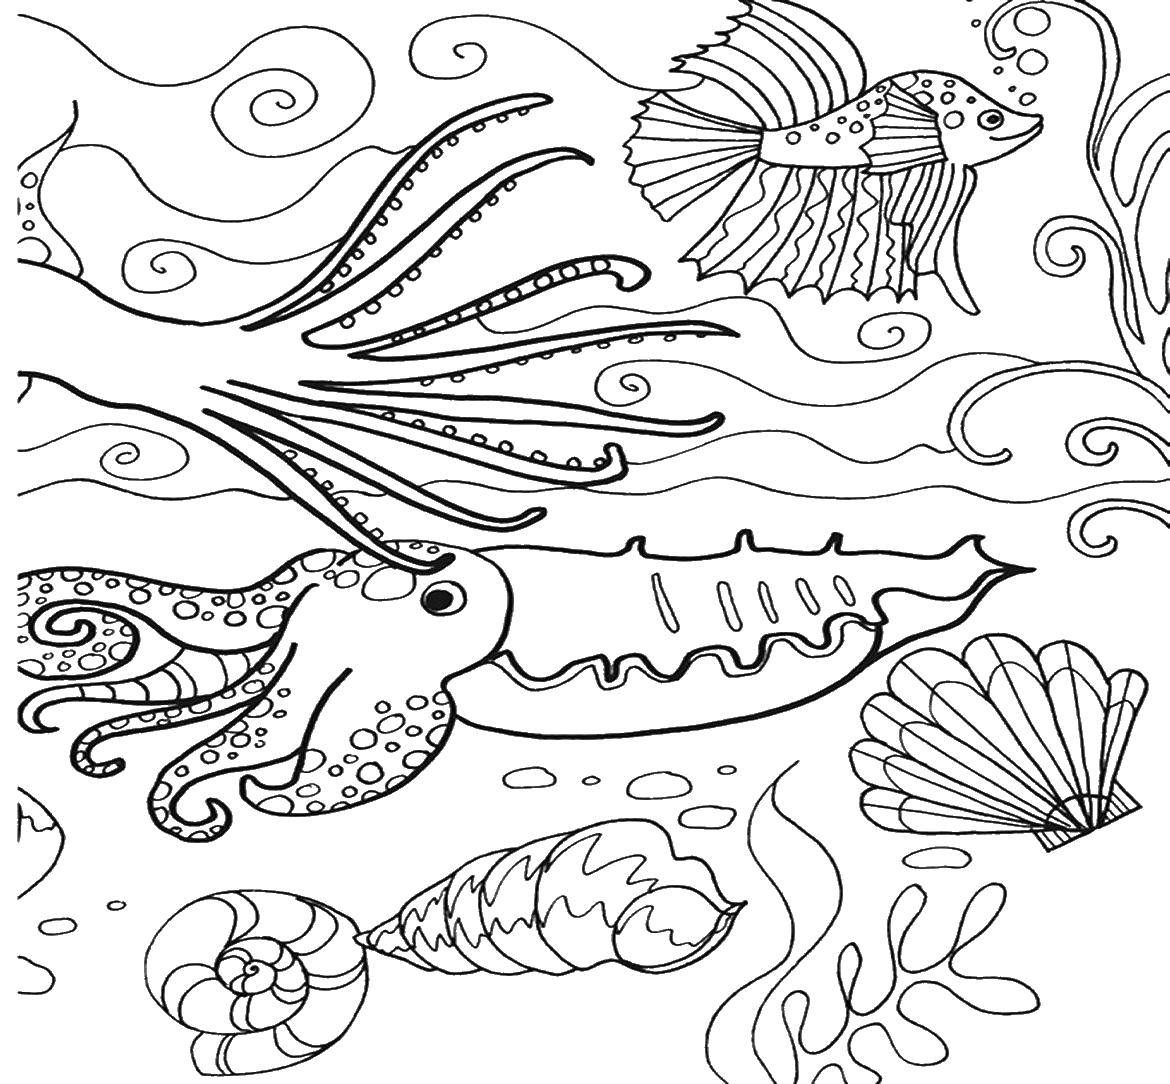 Coloring Squid and shells. Category sea animals. Tags:  squid, fish, shells.